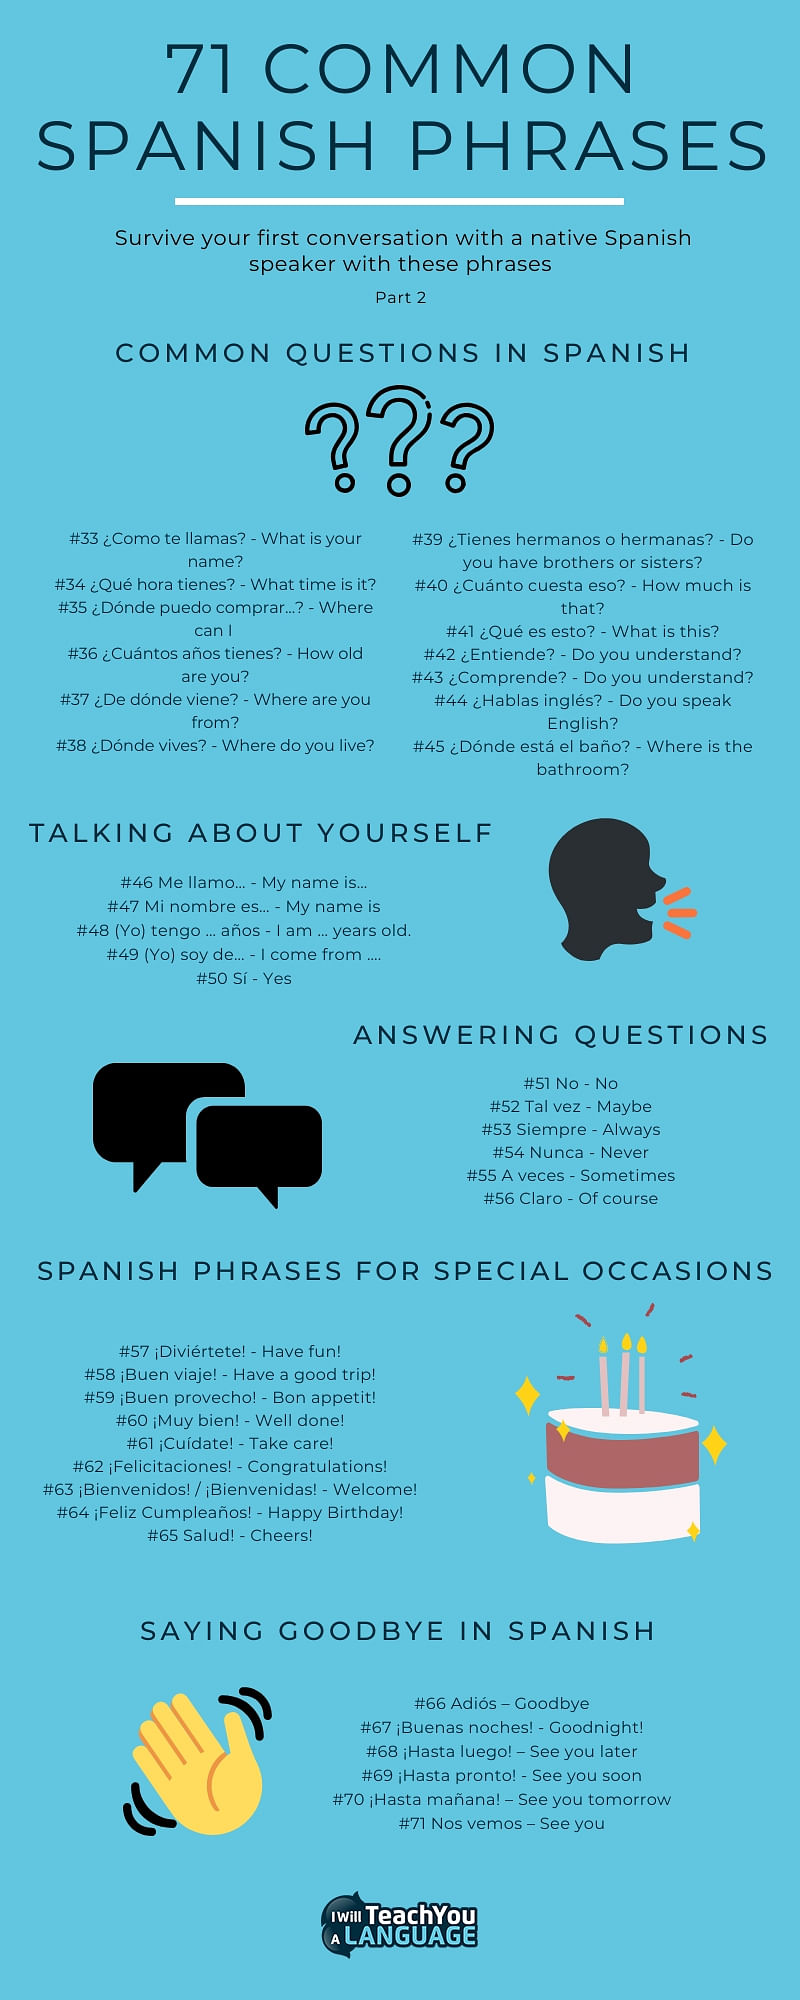 71 Common Spanish Phrases To Survive Any Conversation